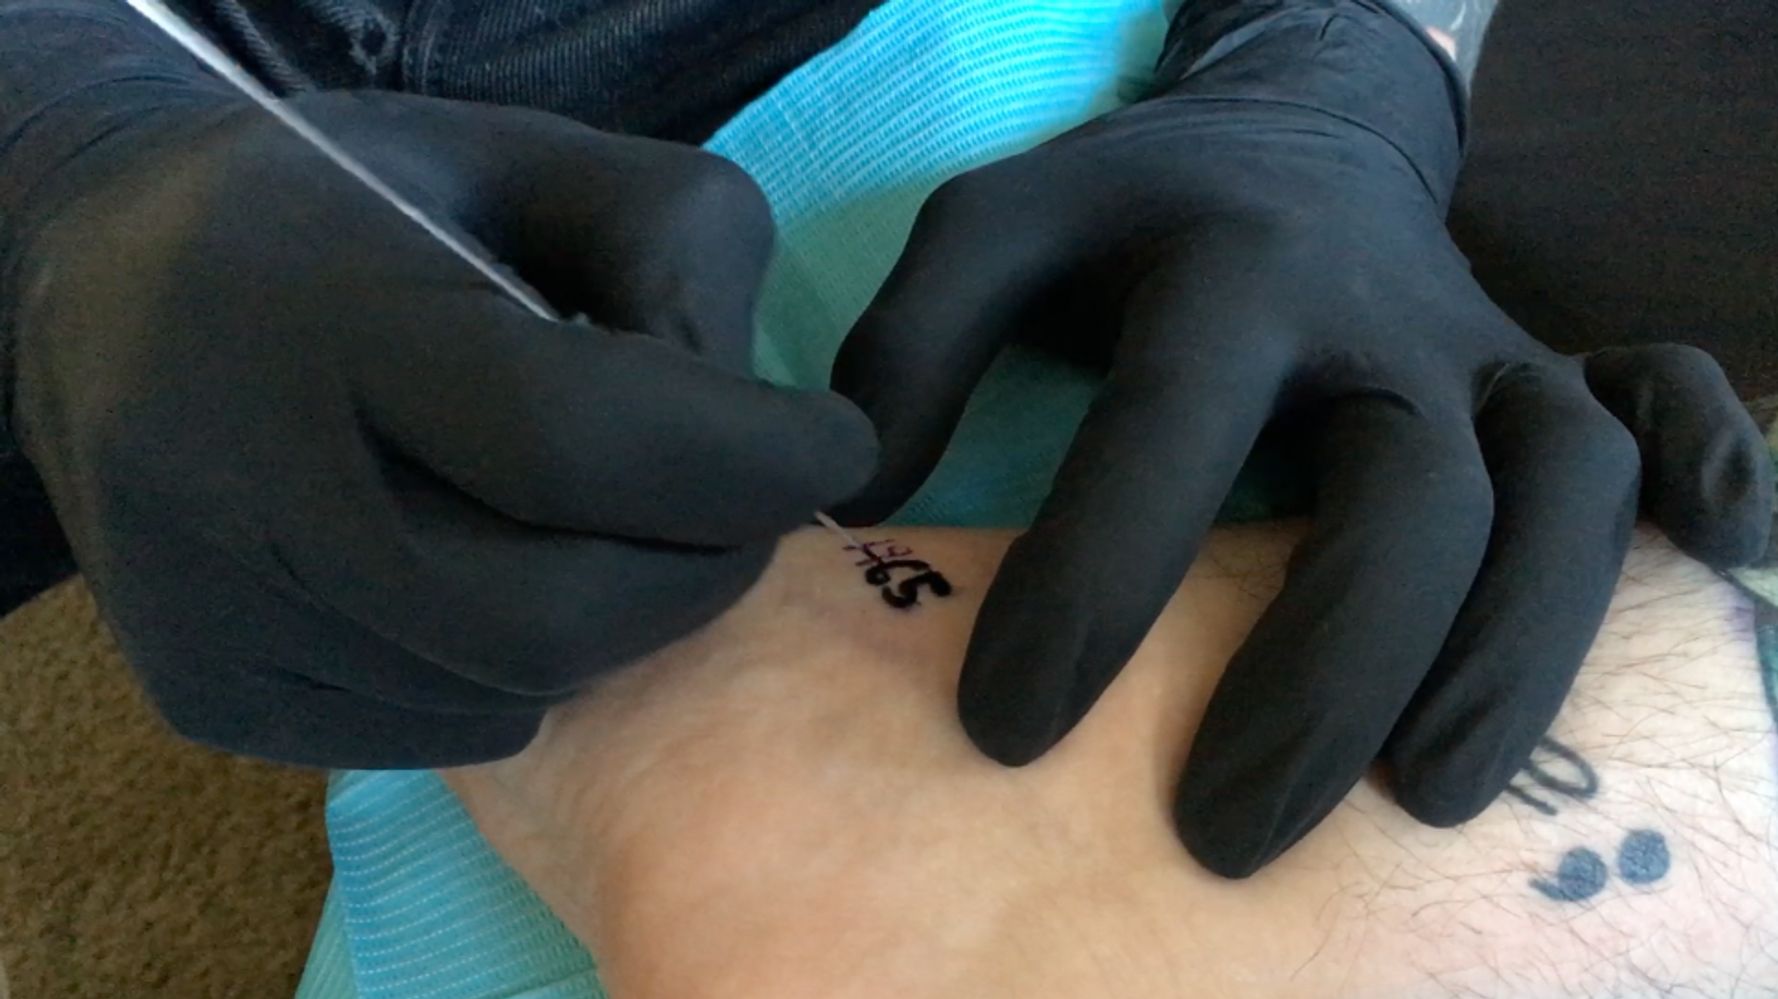 Important Tools You'll Need for Stick-and-Poke Tattooing